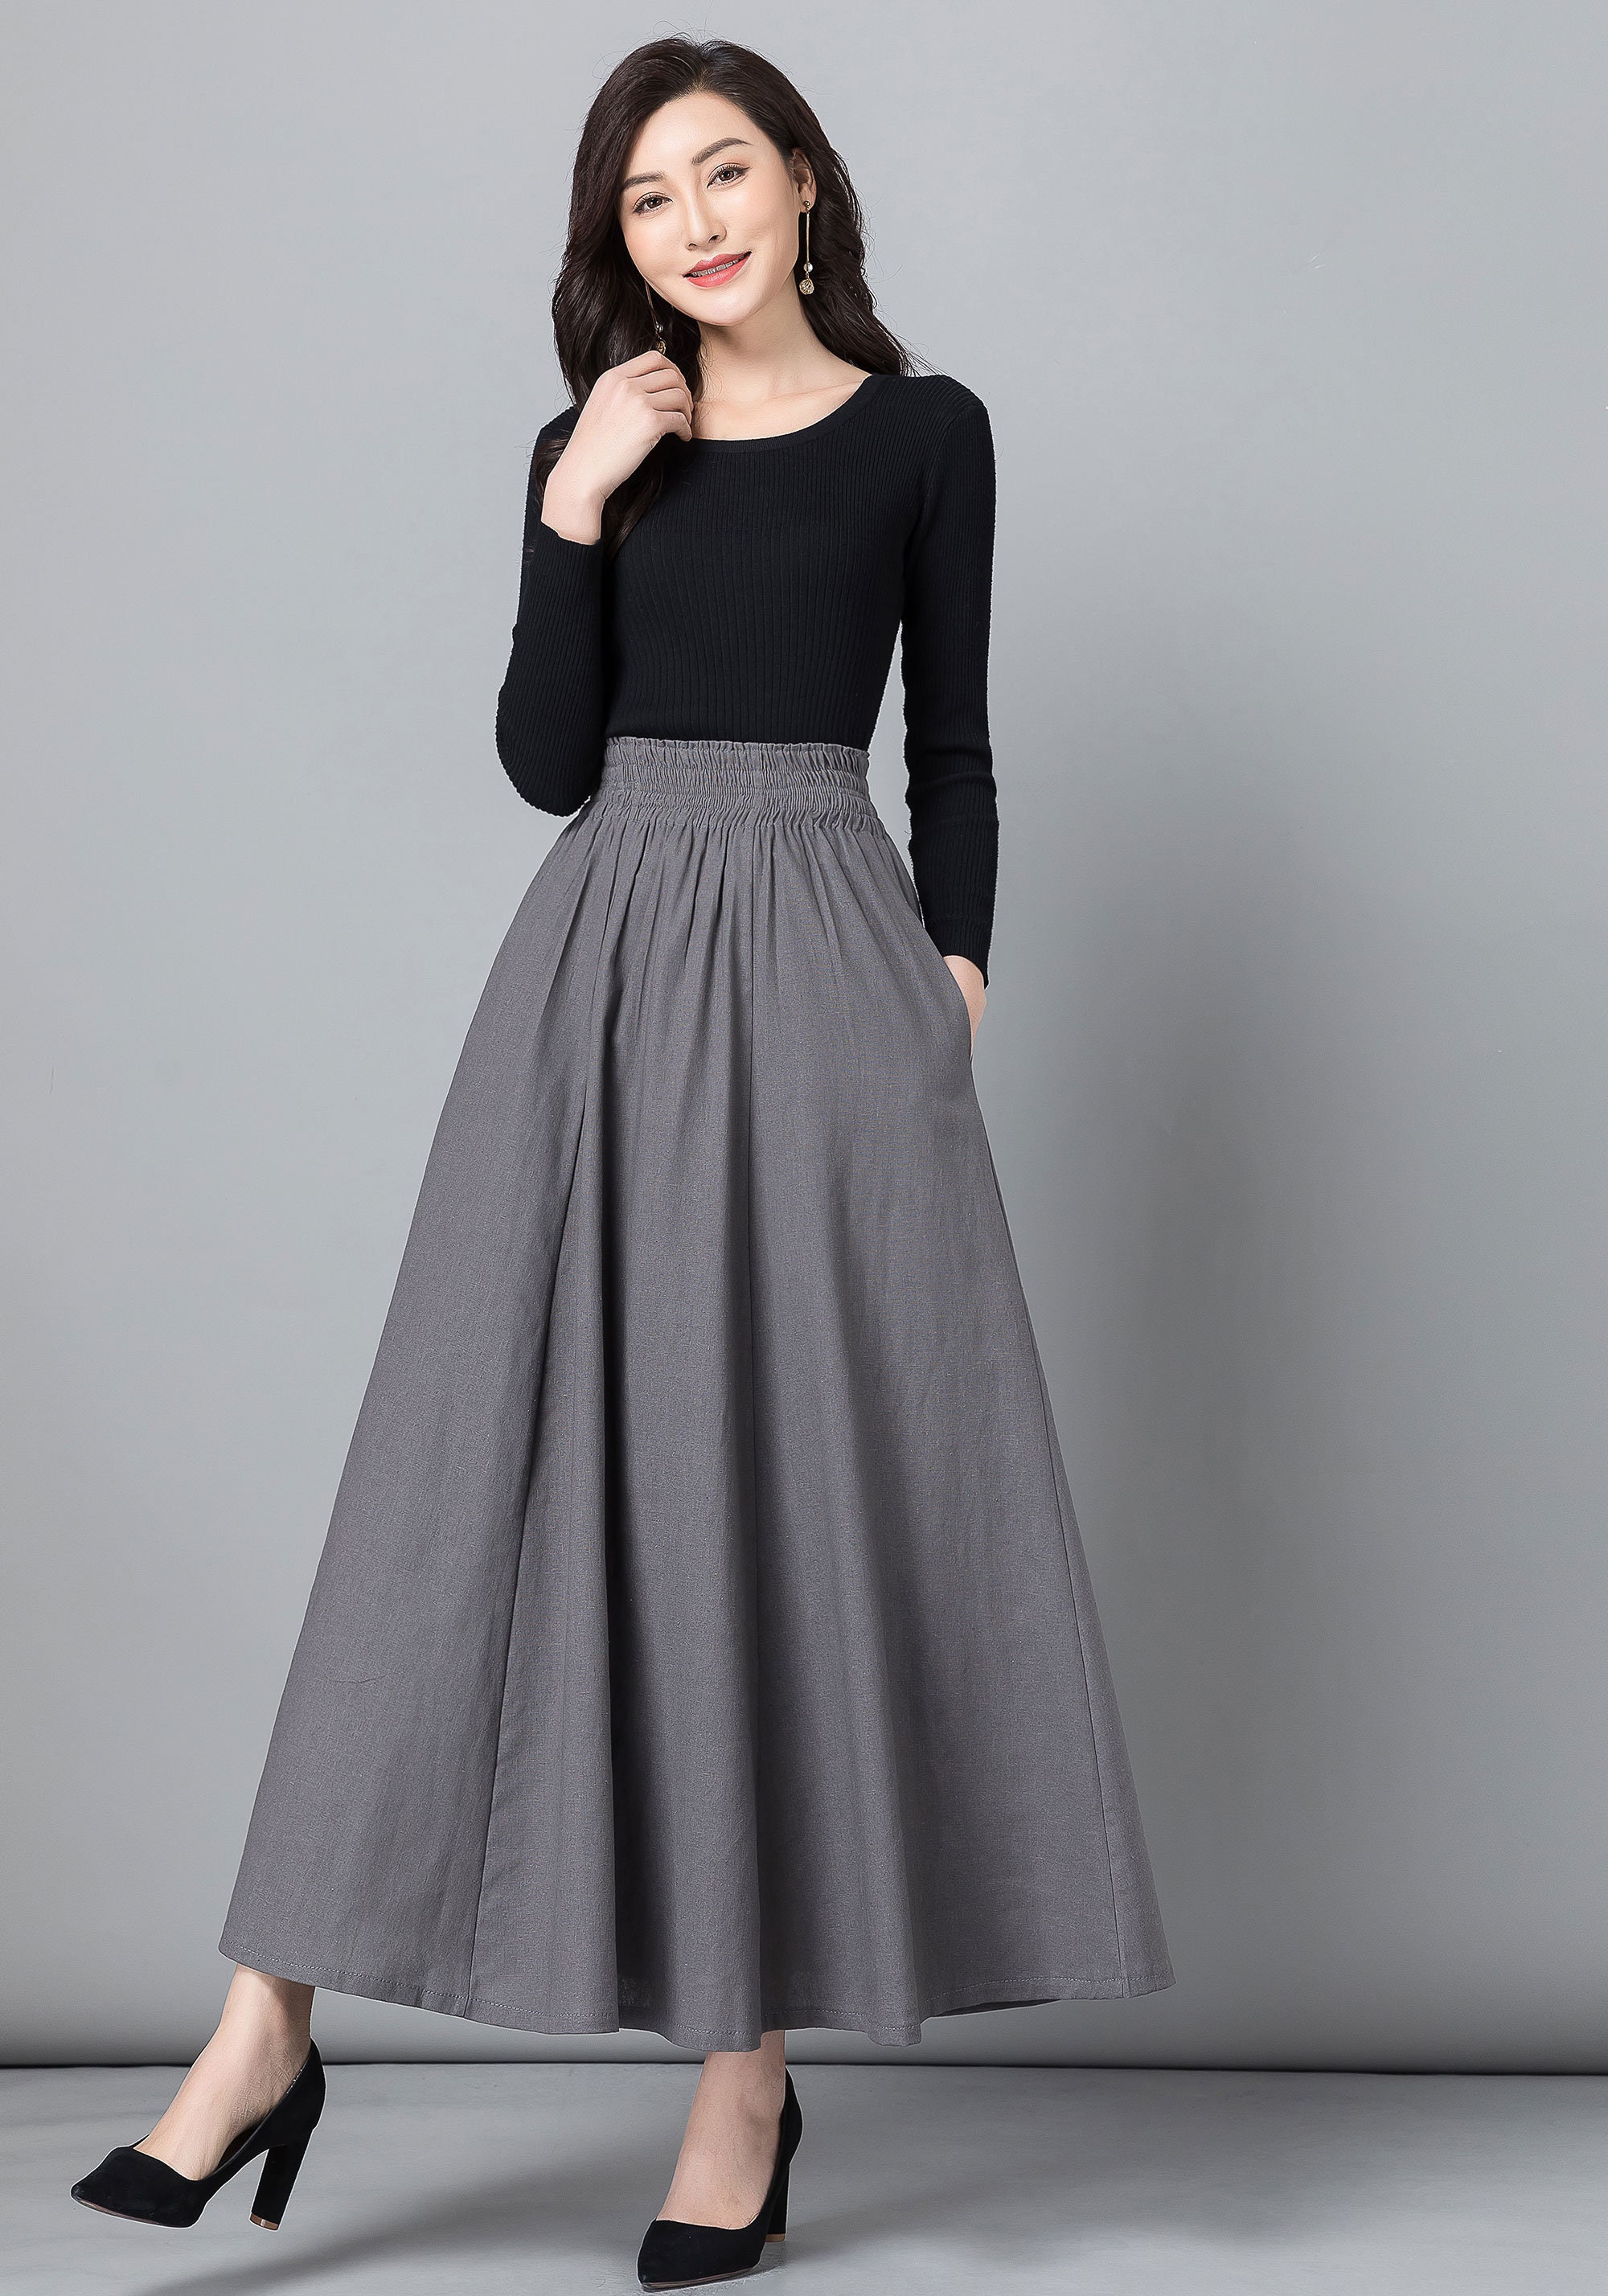 High waist Long pleated Swing skirt with pockets Gray skirt | Etsy